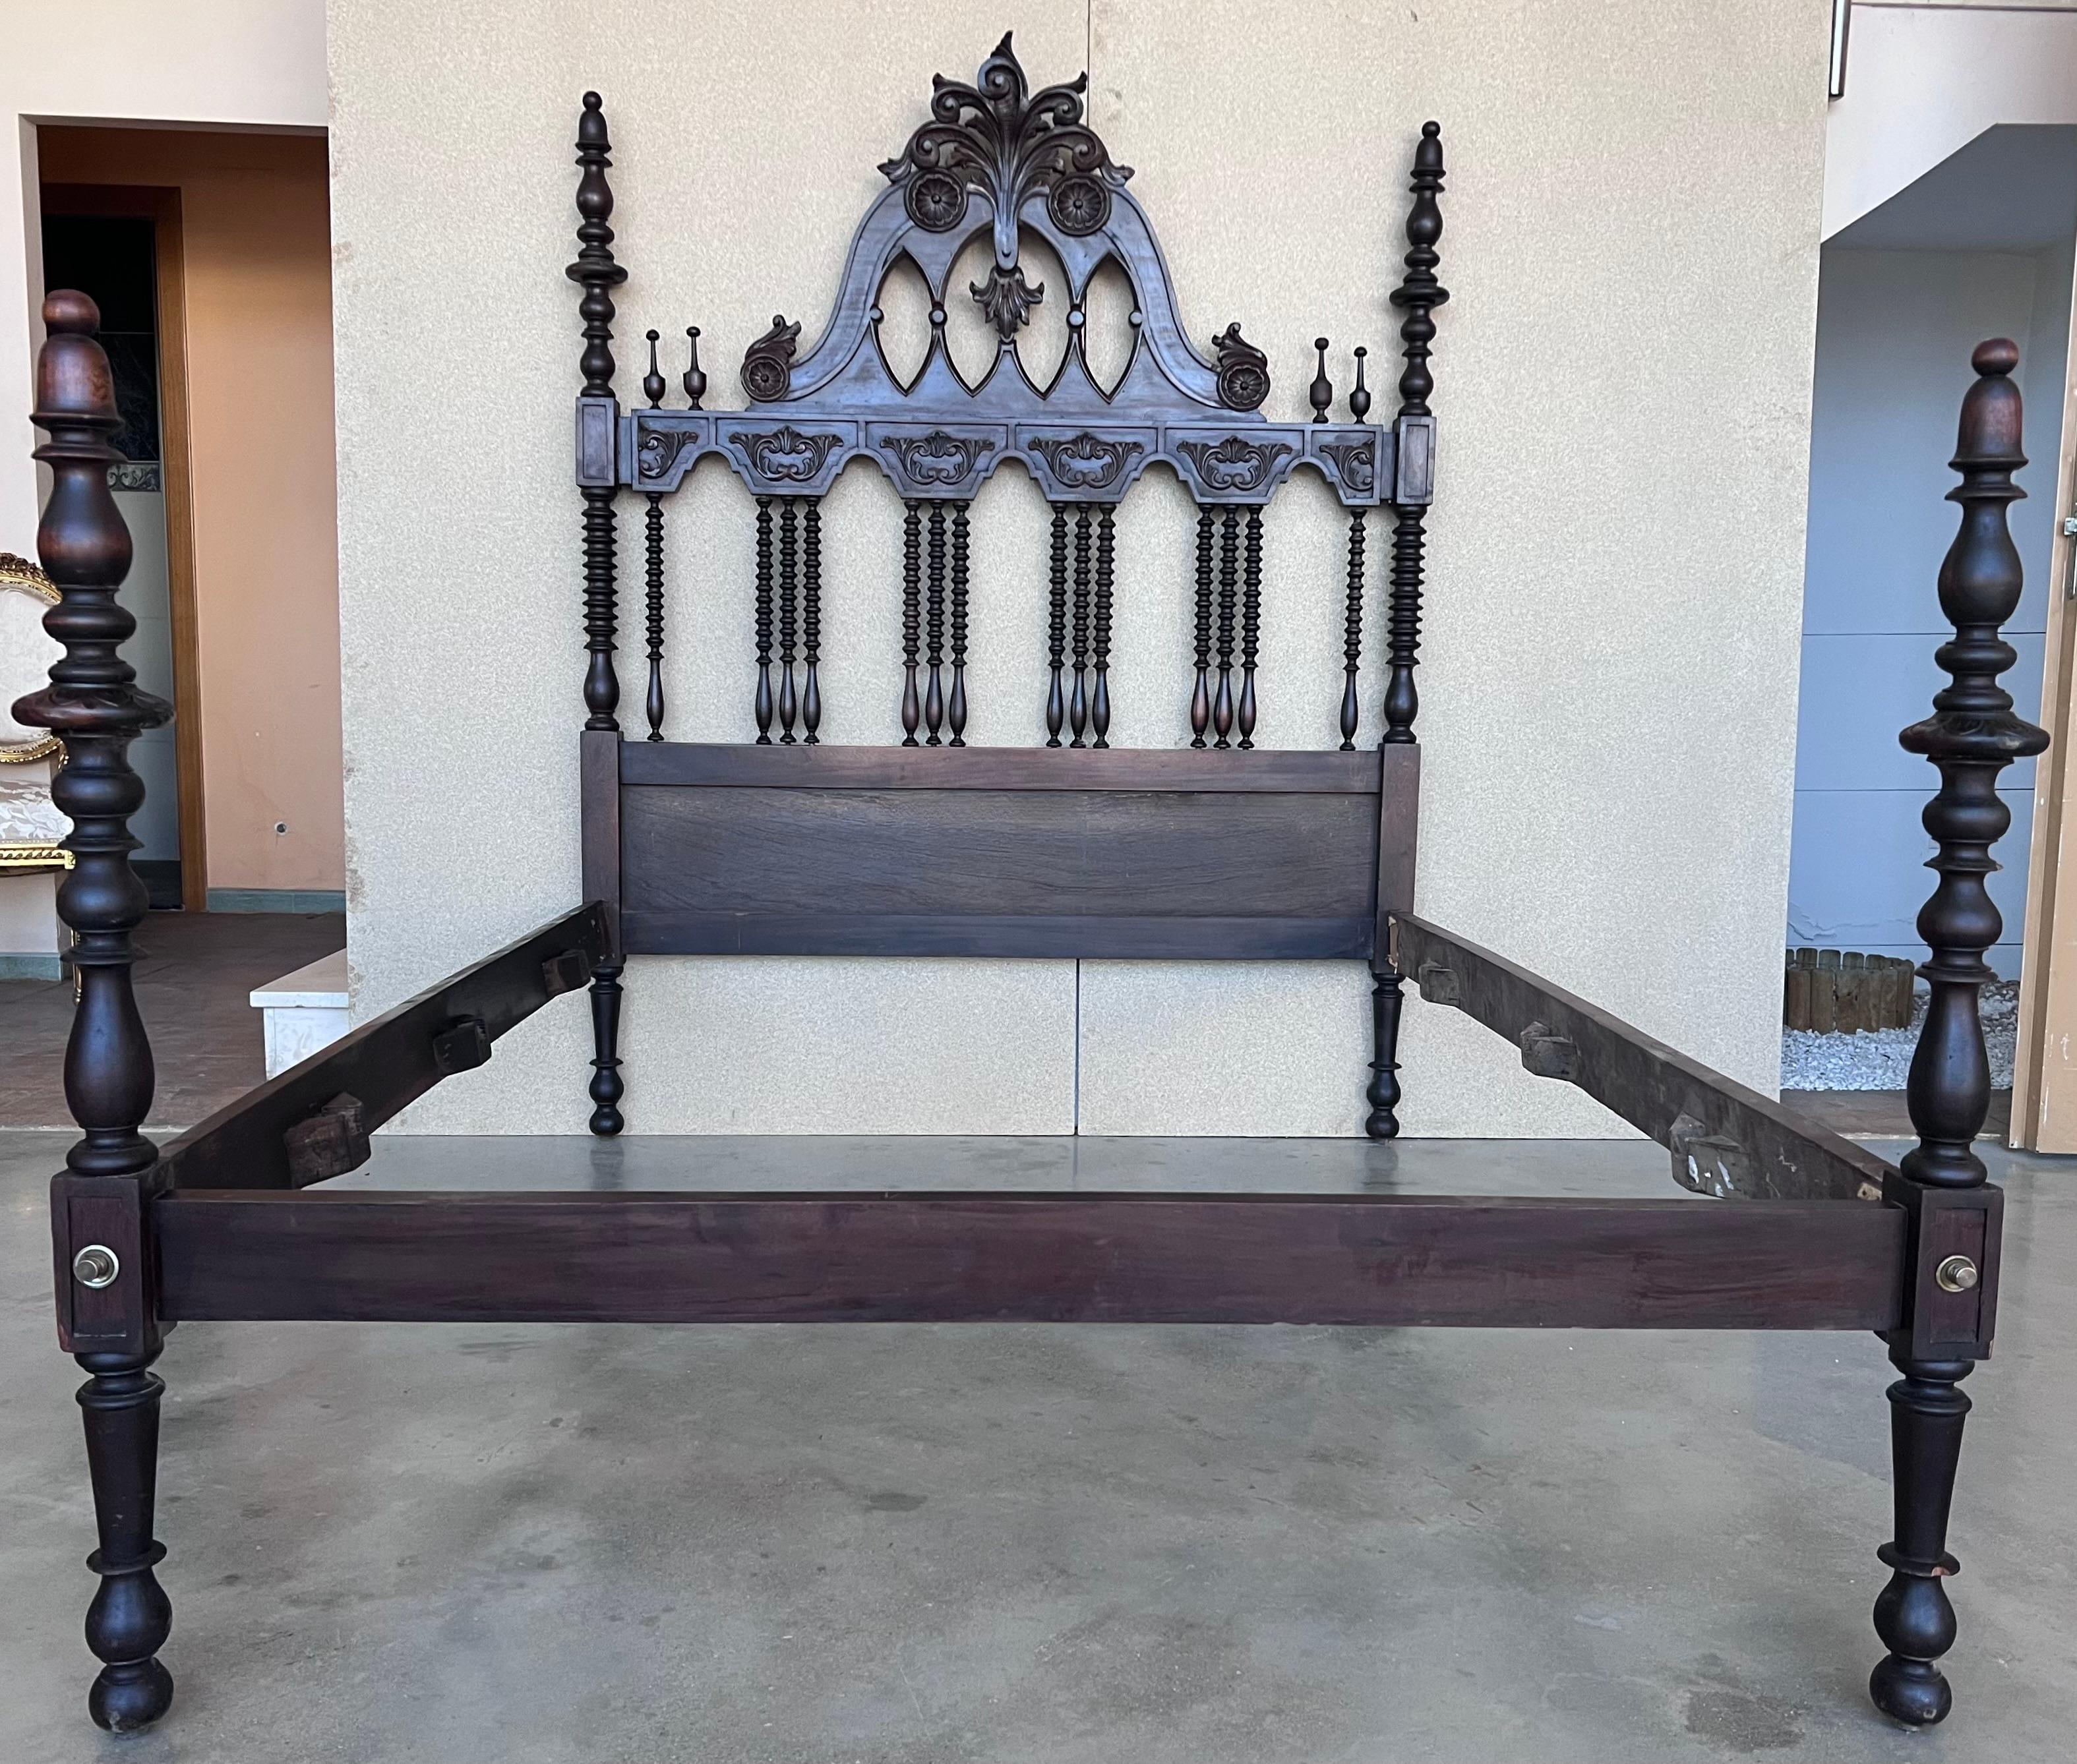 19th Century baroque bed, original Spanish bed.

This queen size 4-poster bed is hand carved with elaborate details, spiral turned post, 3D open spiral twist spindles, and moorish details represented by the repetition of arches. It is carved and